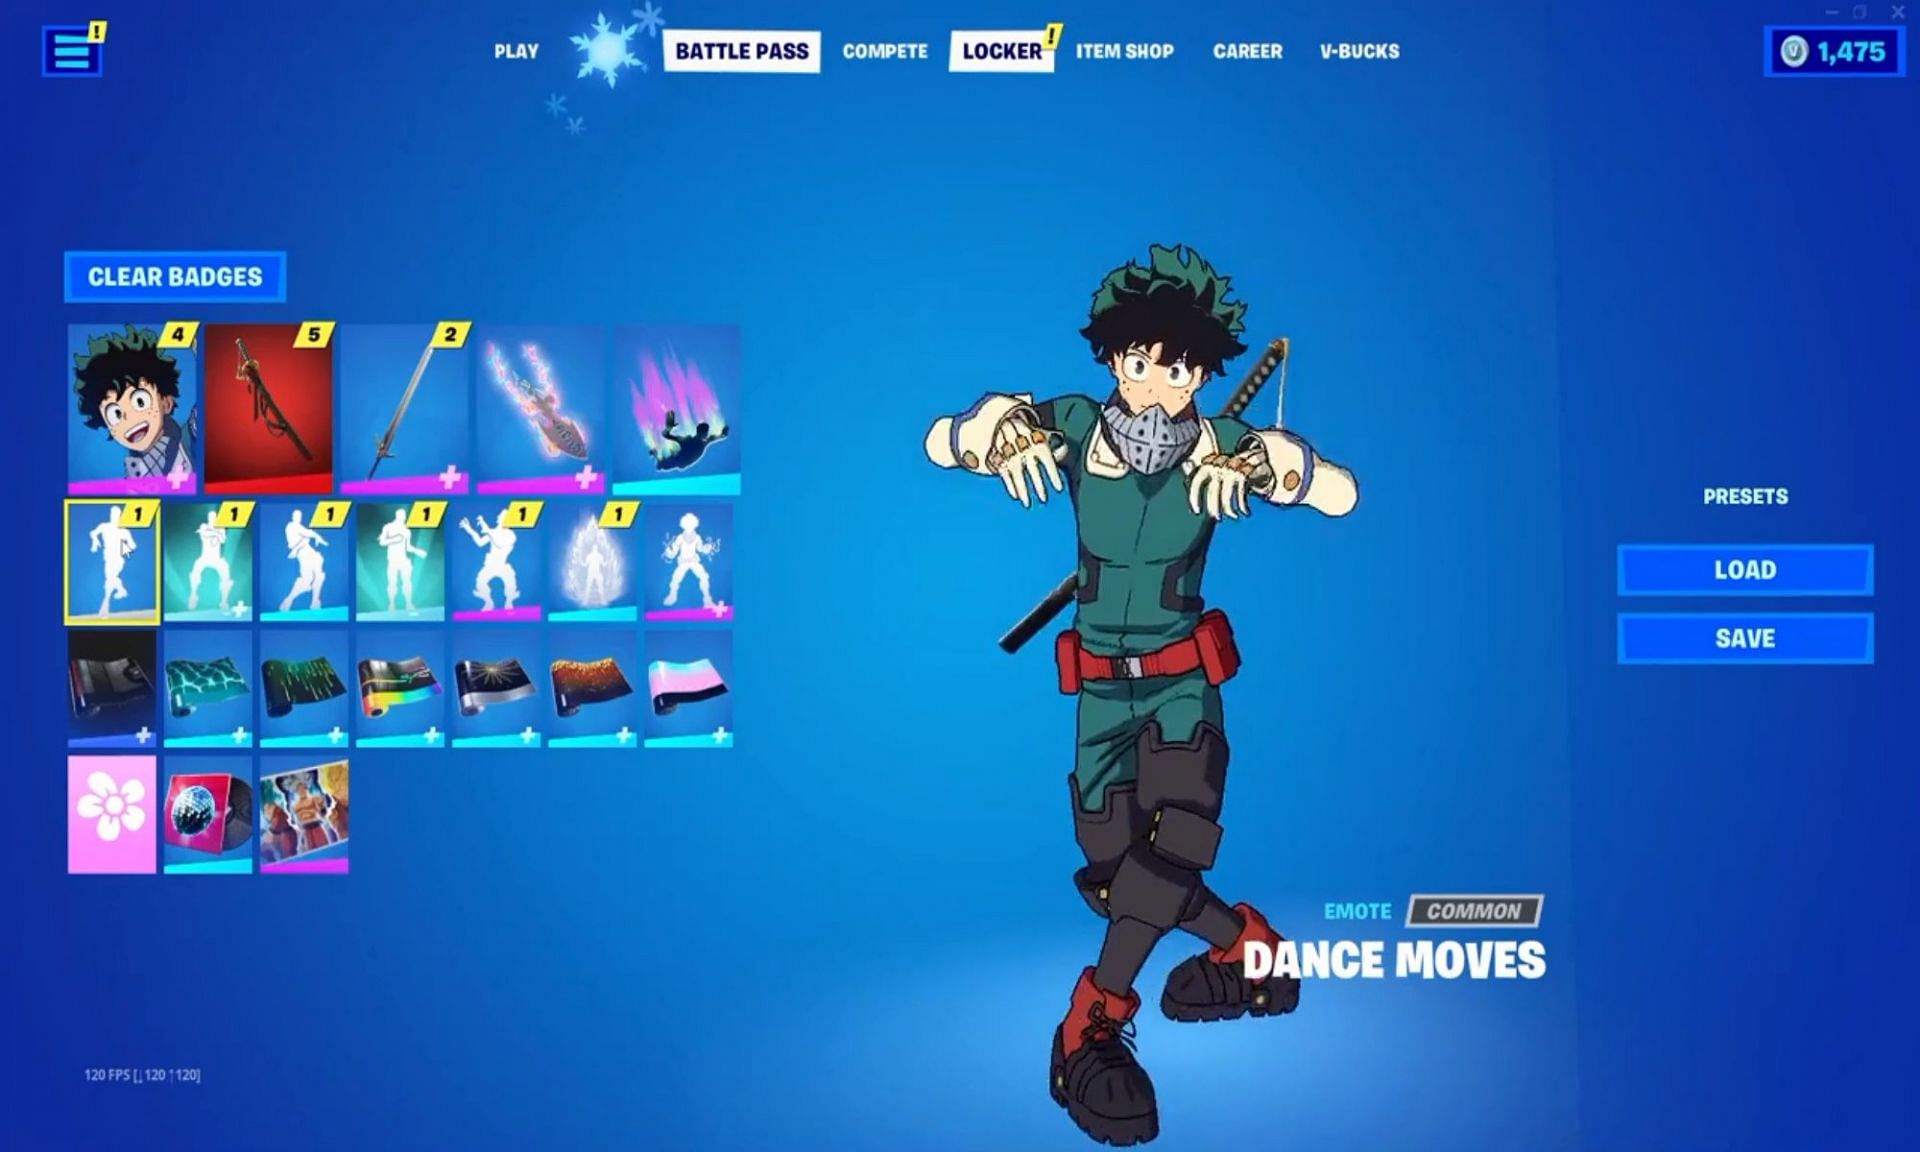 Deku is showing off his dance moves